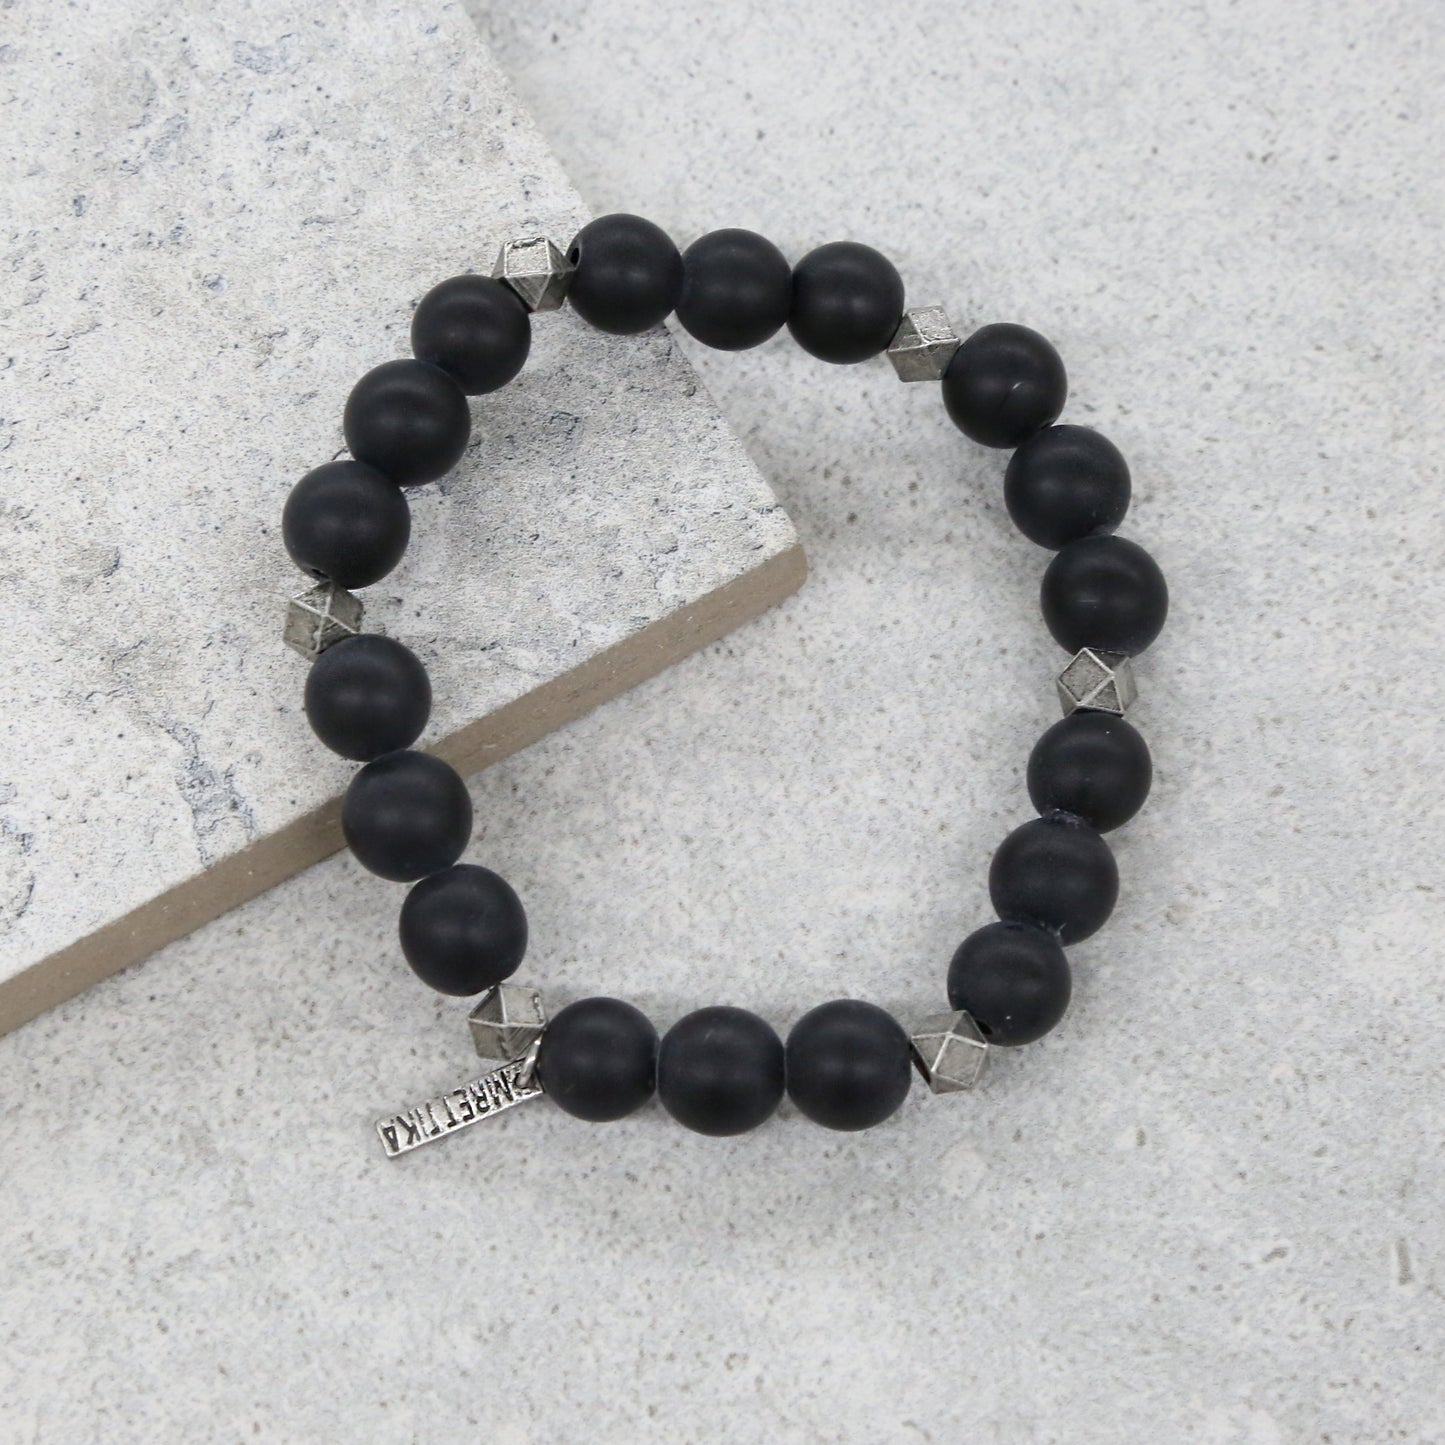 Mens Black Agate Bead Bracelet with Silver Faceted Beads